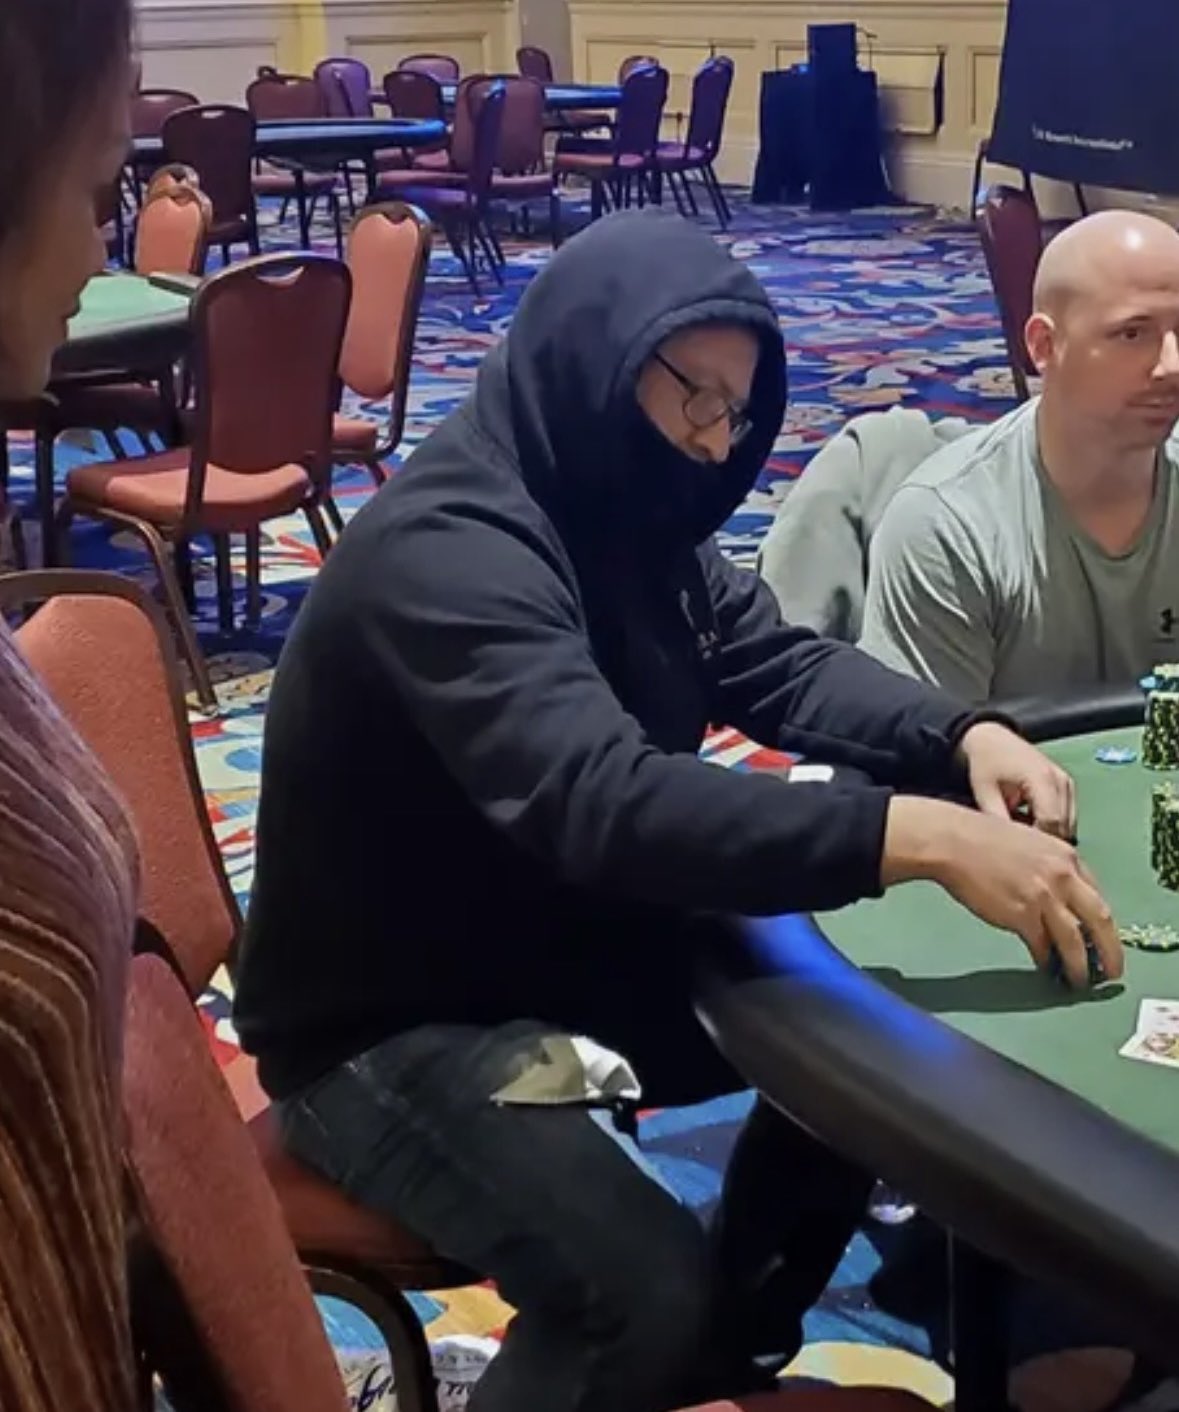 Alleged Poker Cheater Resurfaces at Tourney in Mississippi While Still Owing Money